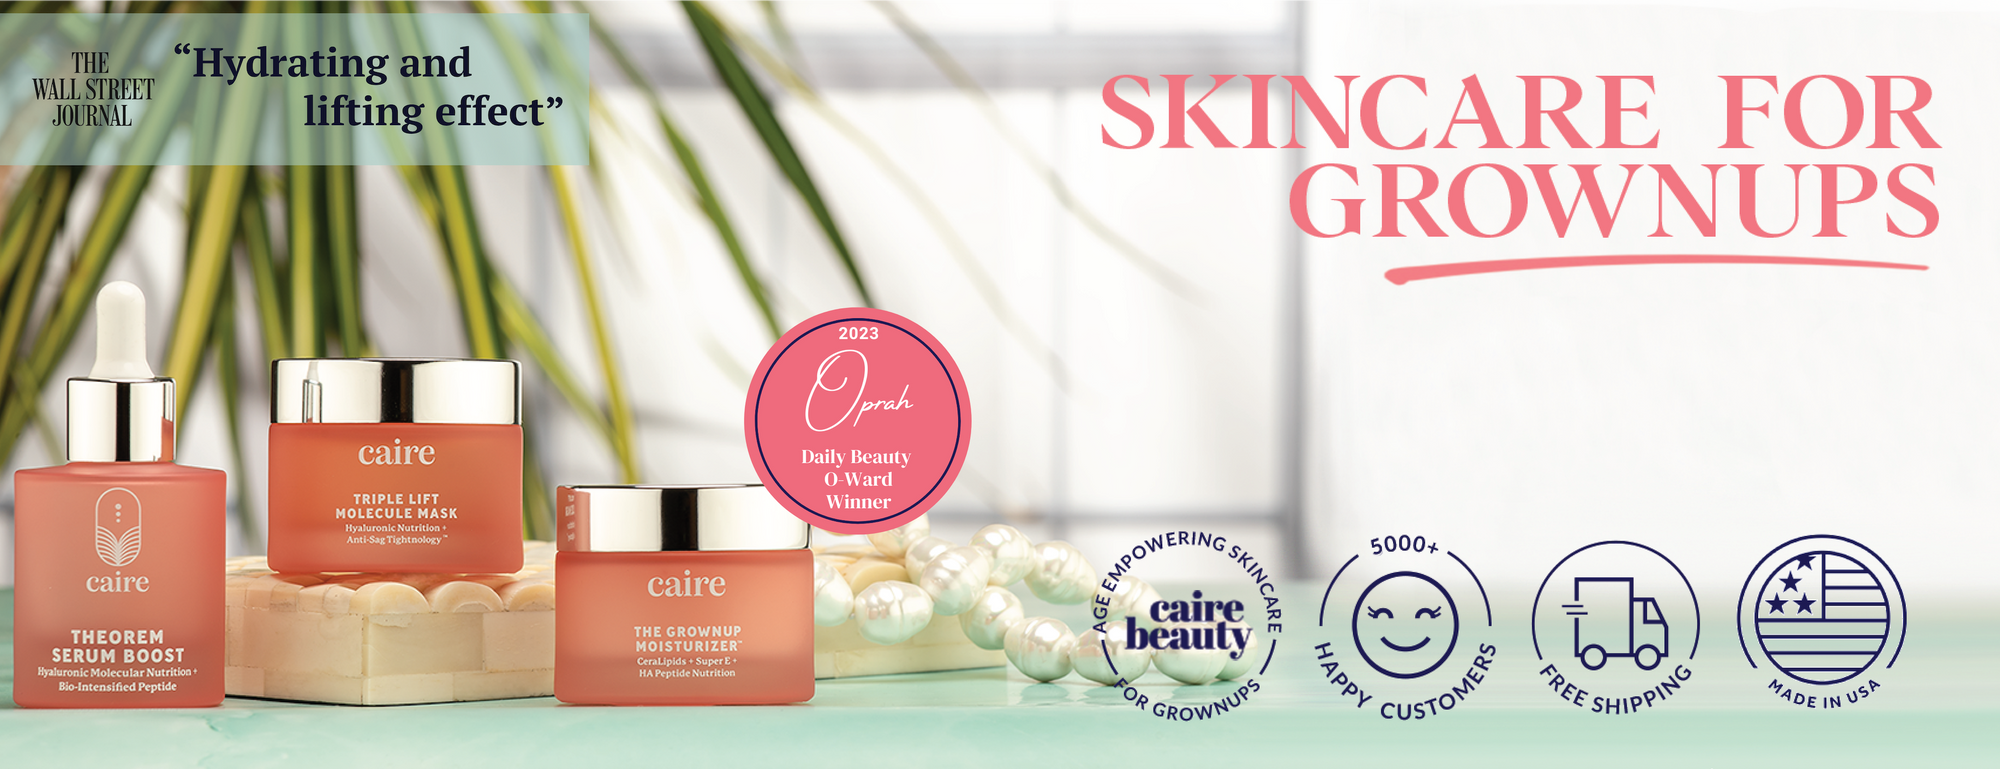 Skincare for Grownups Images of all three Caire Products | Caire